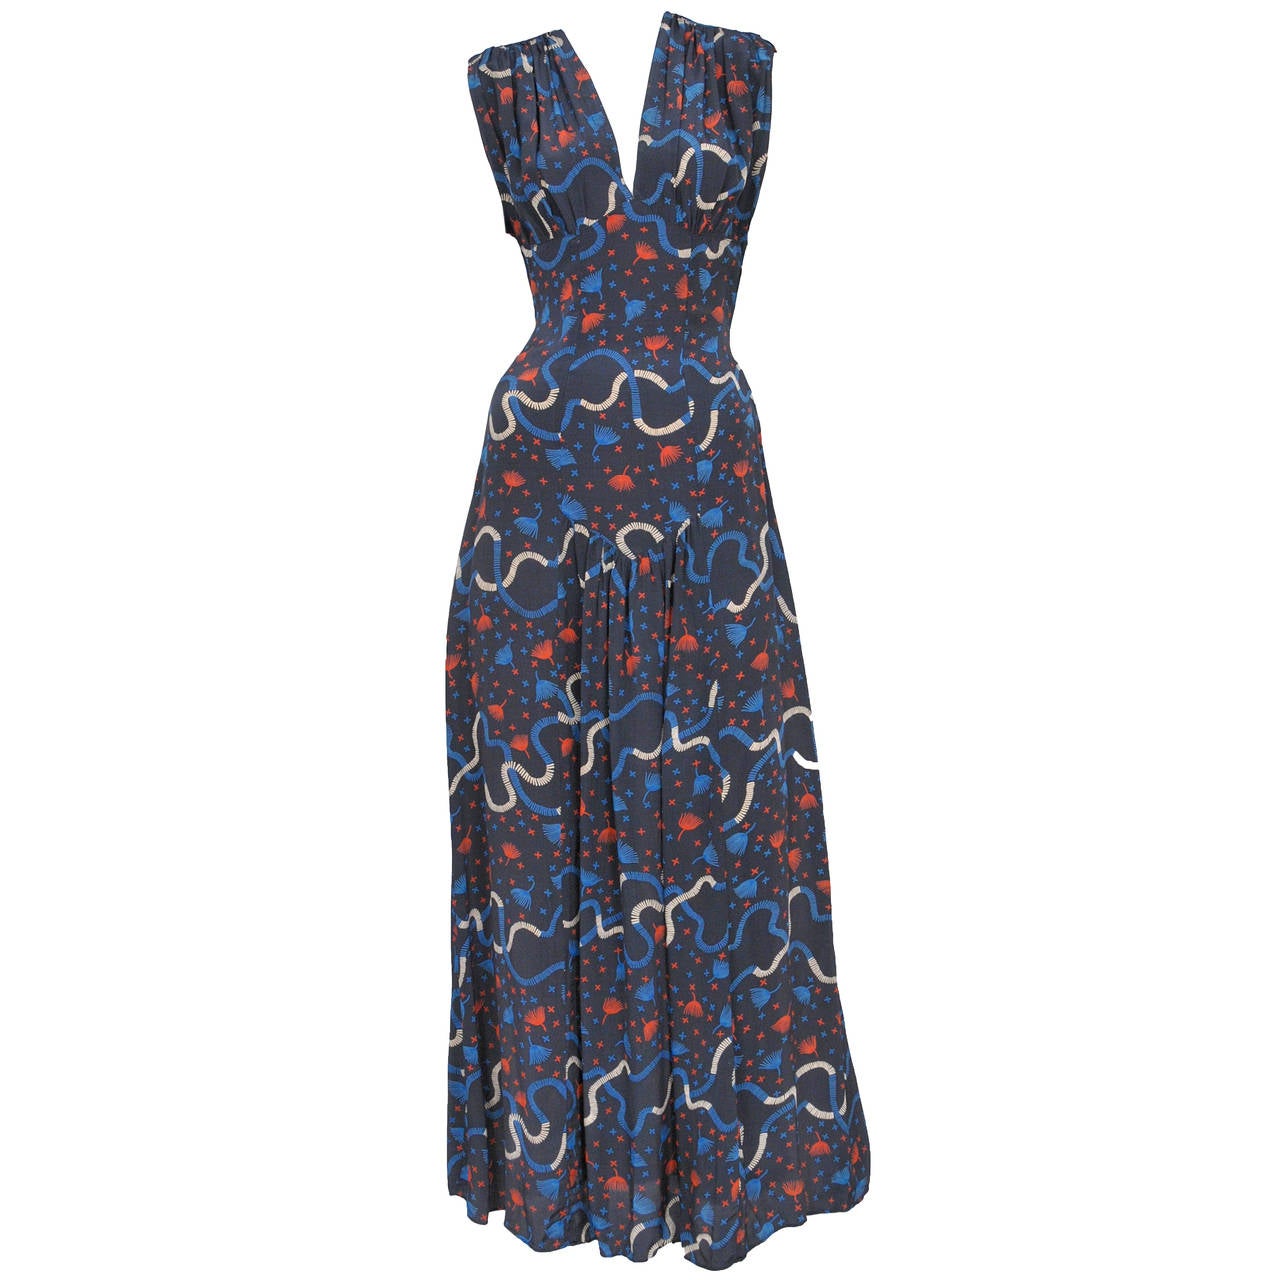 Ossie Clark Snakes and Ladders Print Dress